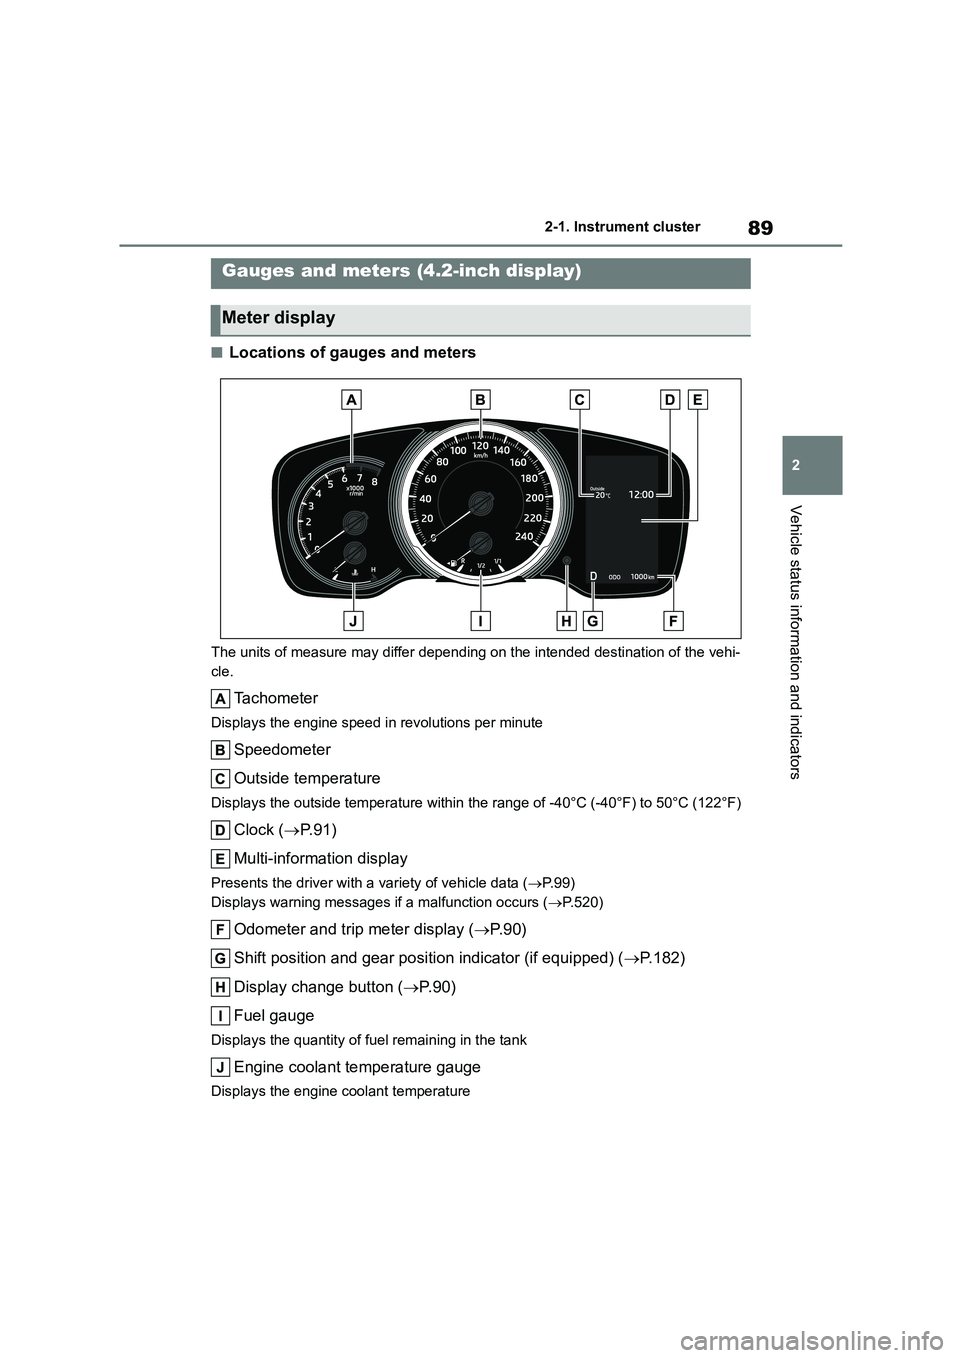 TOYOTA COROLLA HATCHBACK 2022  Owners Manual (in English) 89
2 
2-1. Instrument cluster
Vehicle status information and indicators
■Locations of gauges and meters
The units of measure may differ depending on the intended destination of the vehi- 
cle.
Tacho